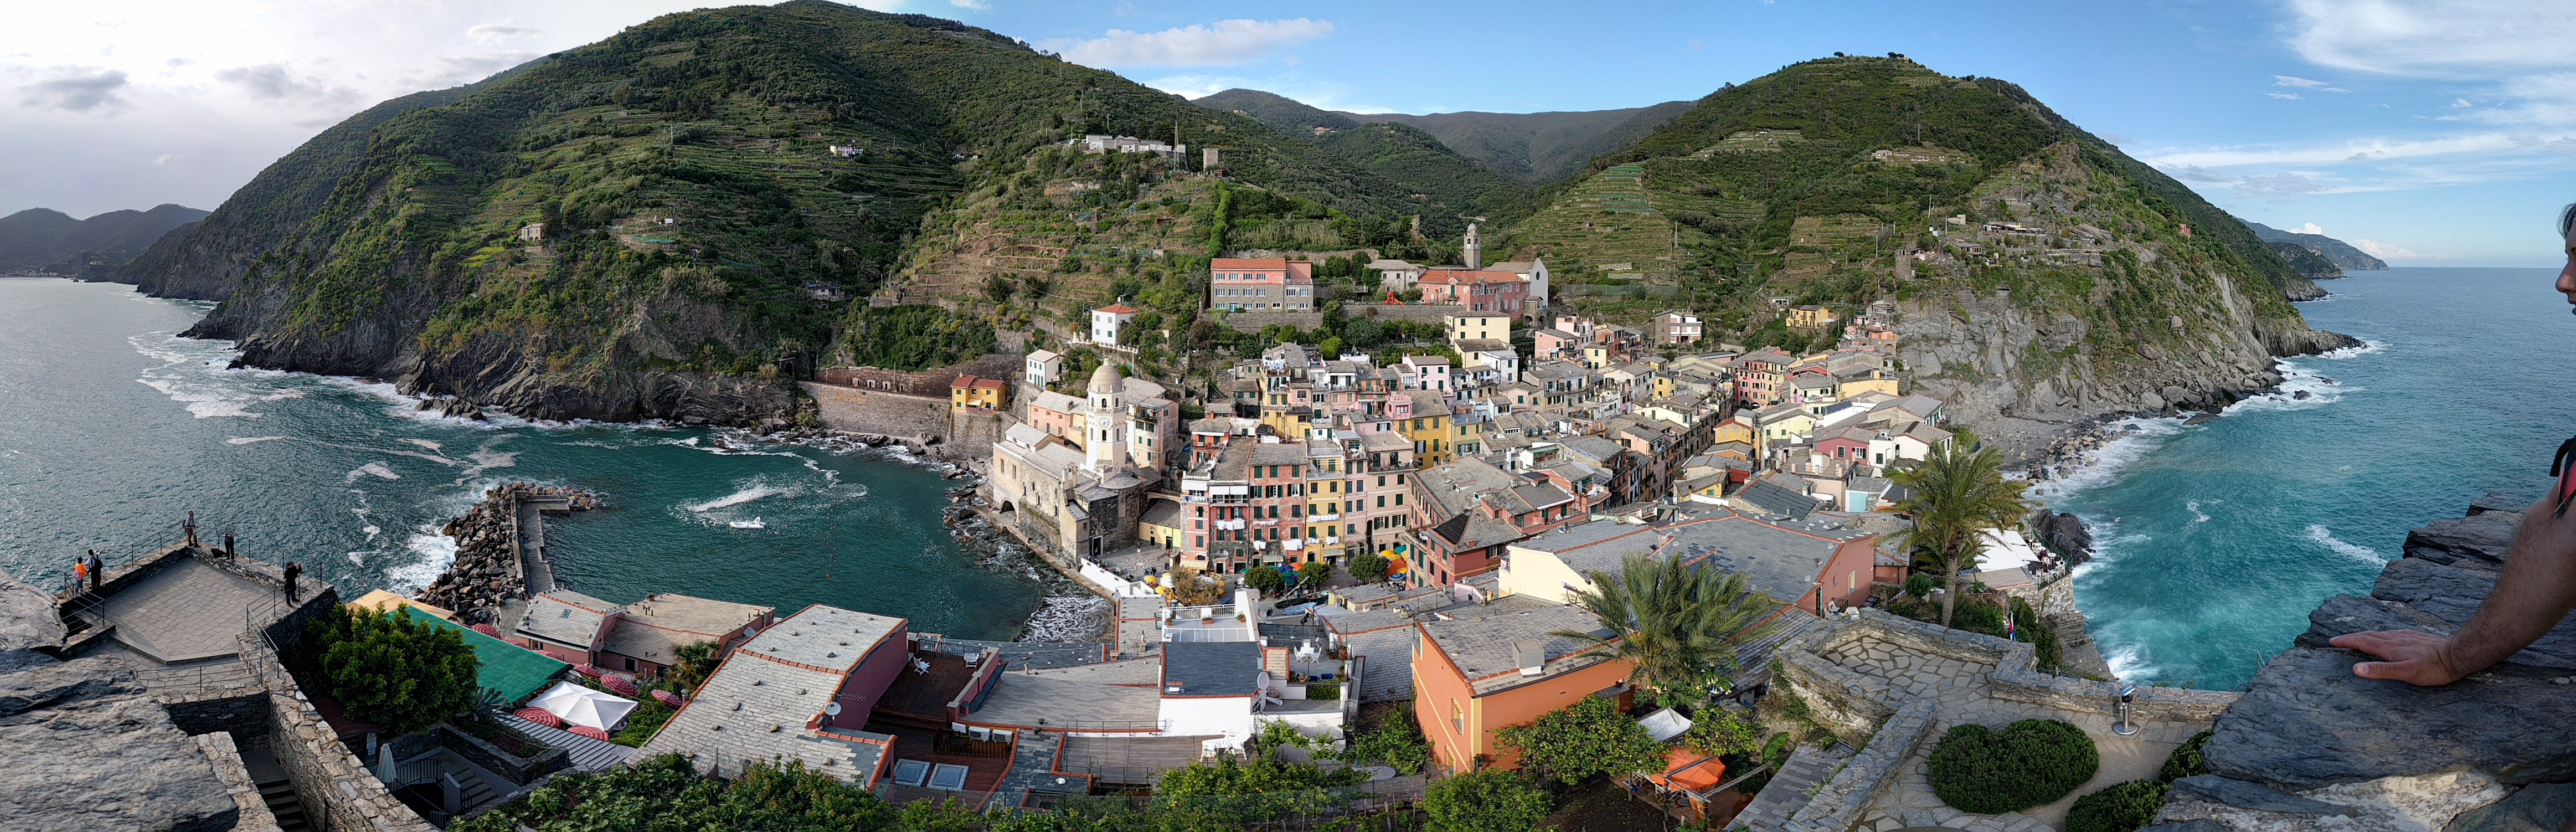 View of Vernazza from Castle Doria